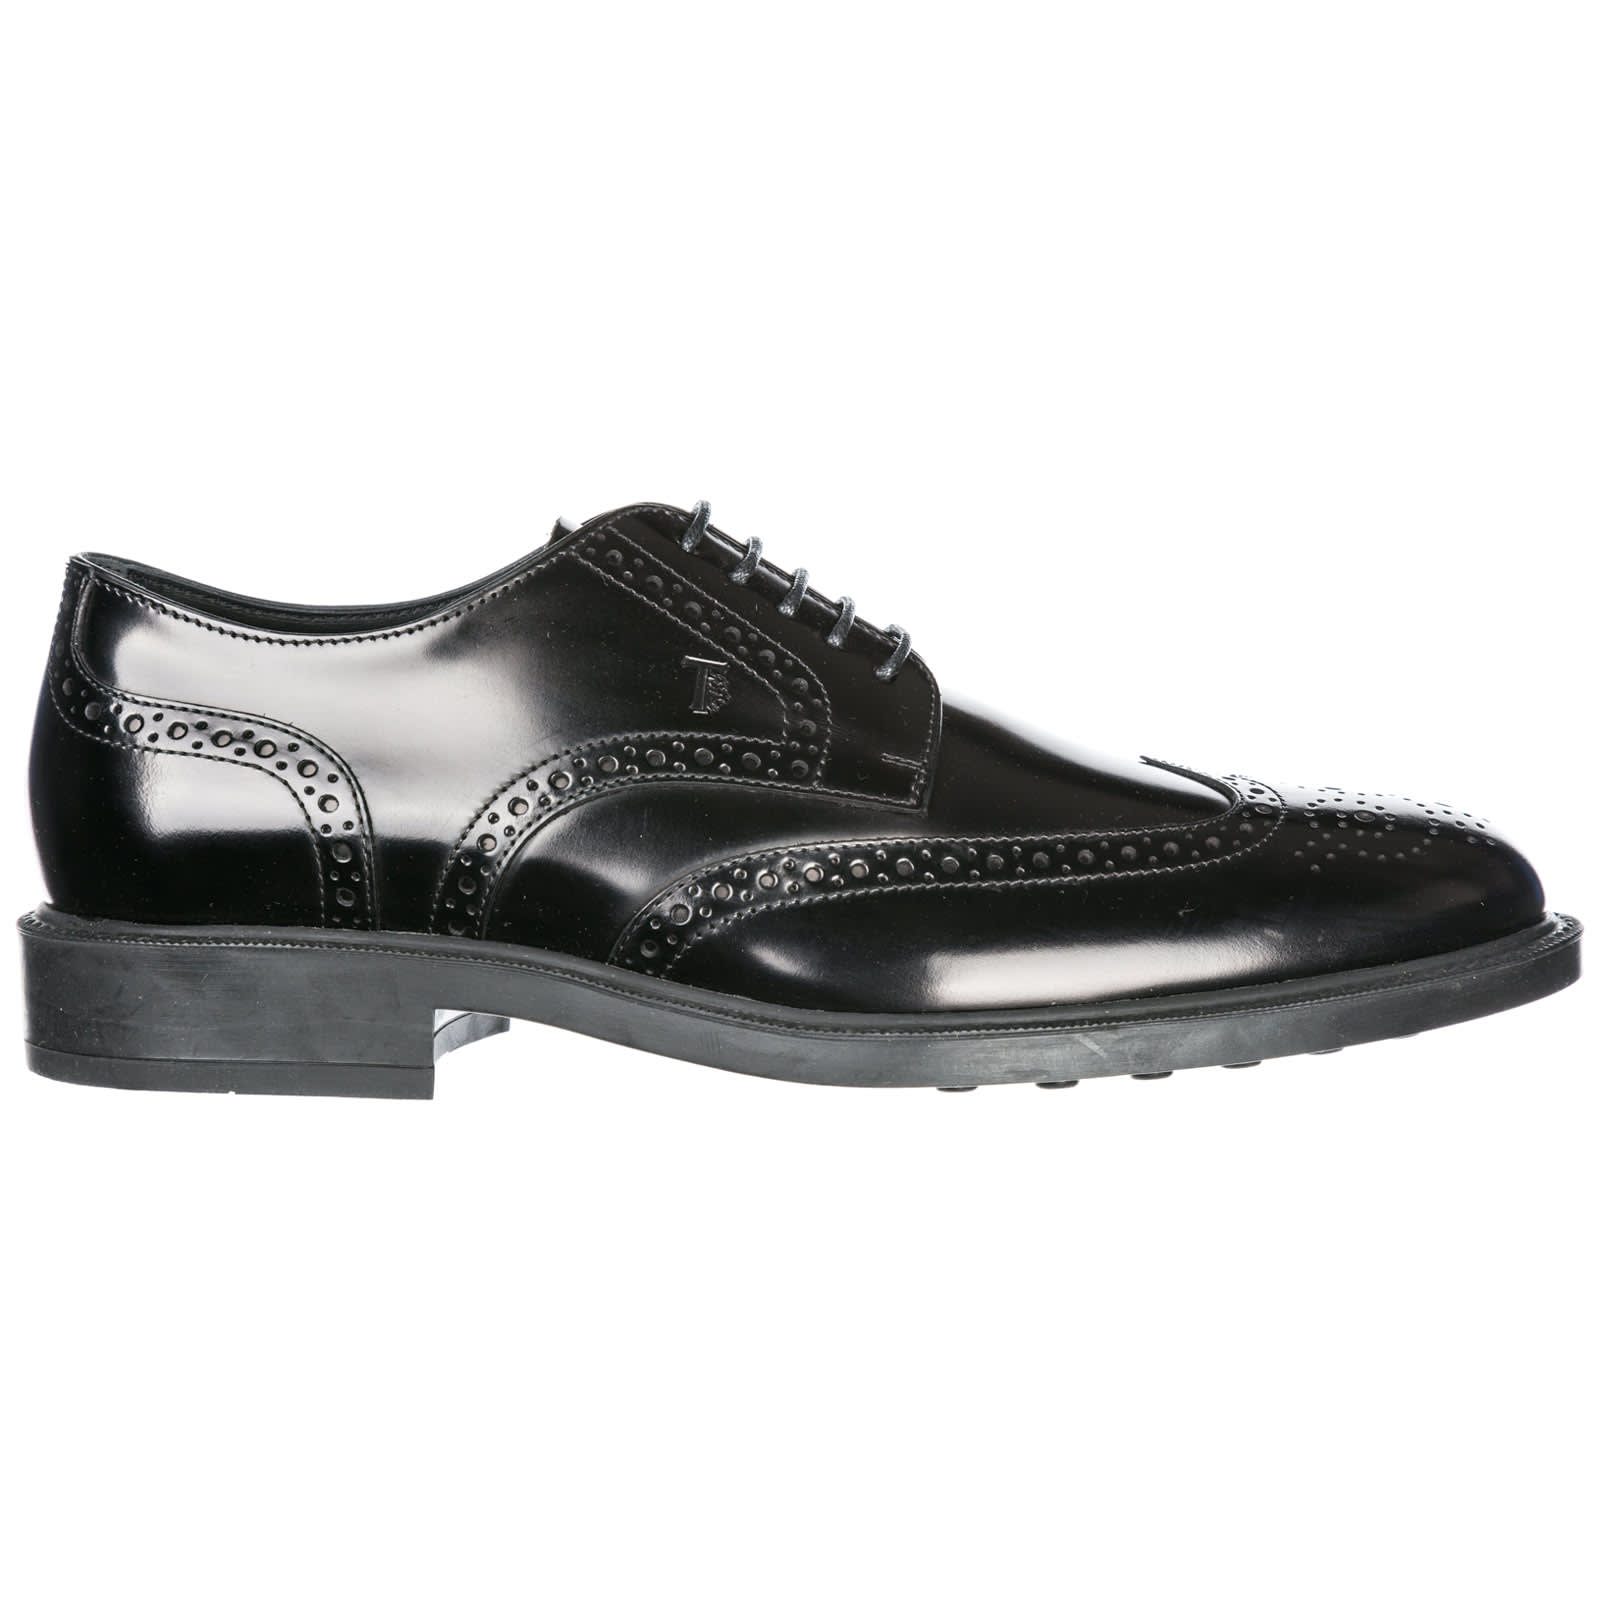 Tods Double T Lace-up Shoes